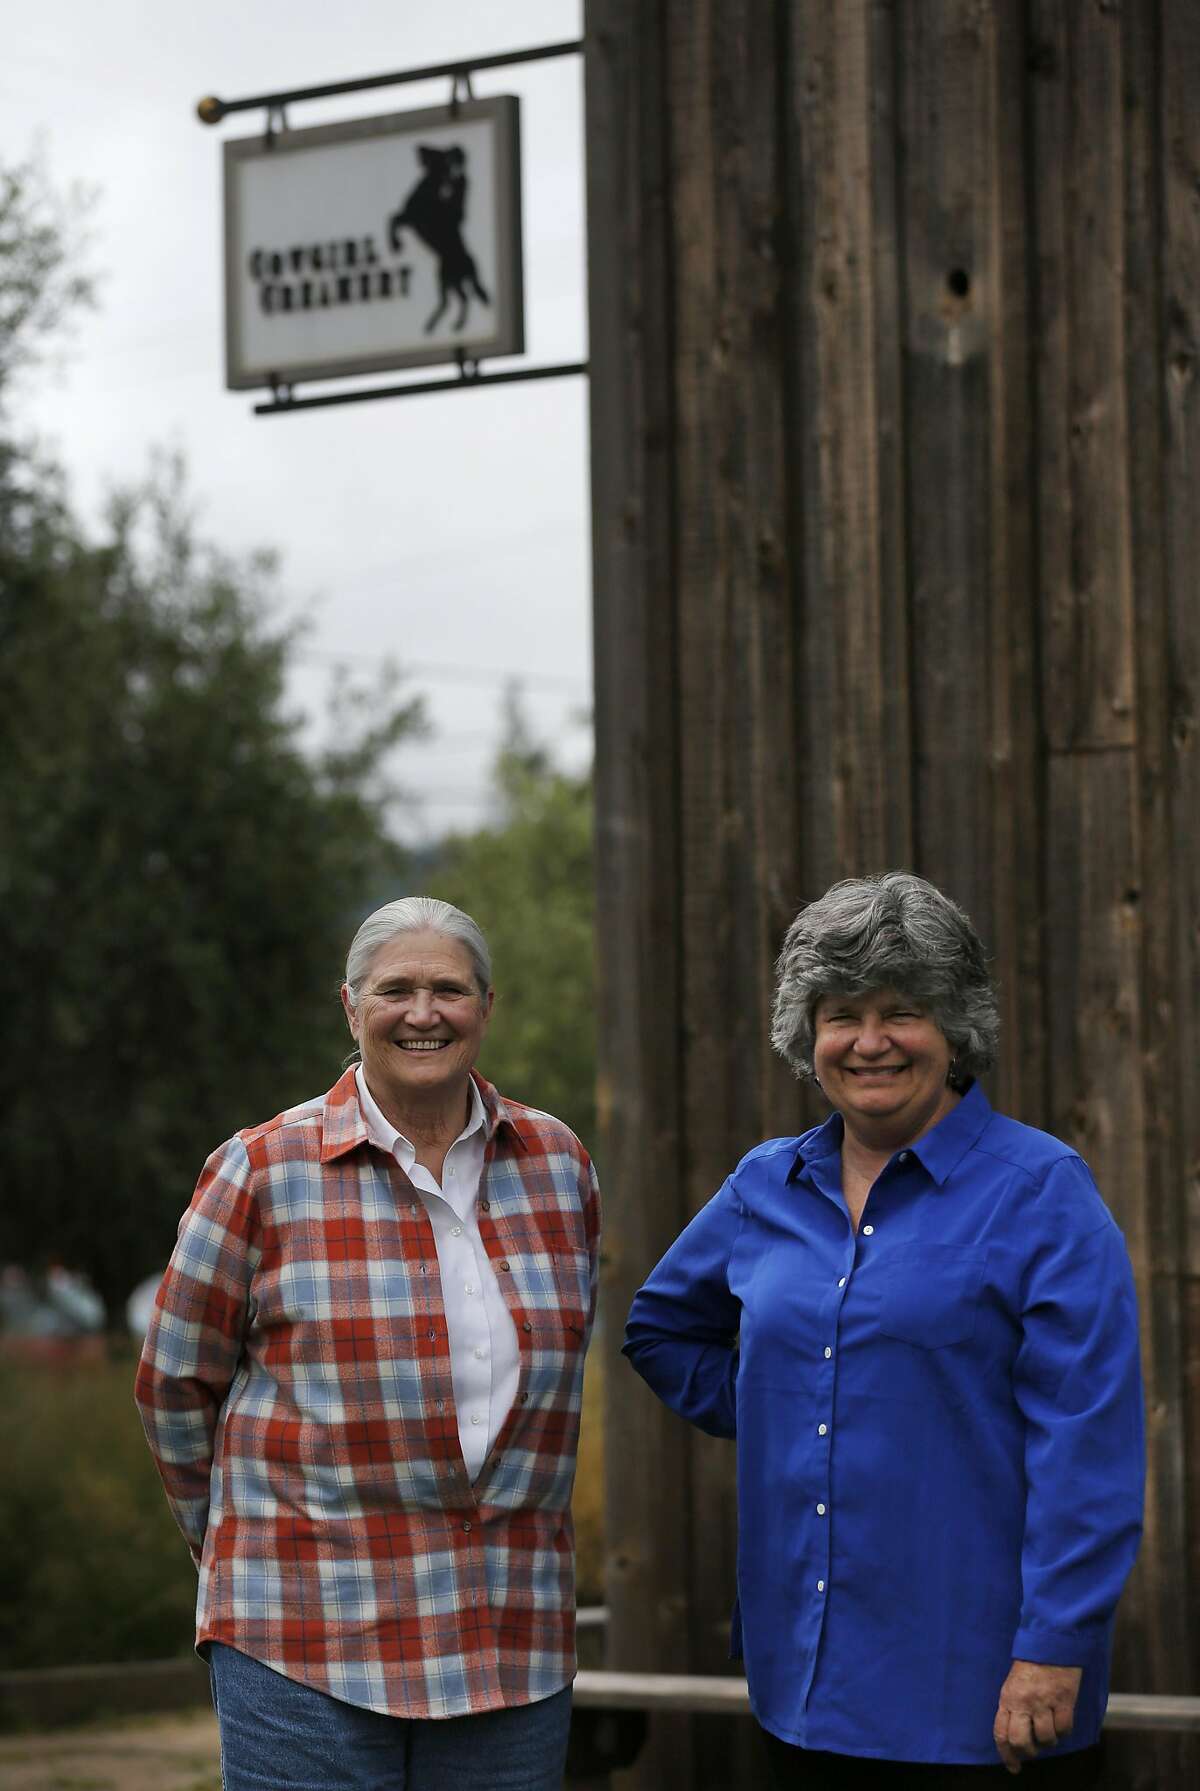 Co-founders of Cowgirl Creamery Peggy Smith, left, and Sue Conley pictured at their shop May 14, 2016 in Point Reyes Station, Calif.